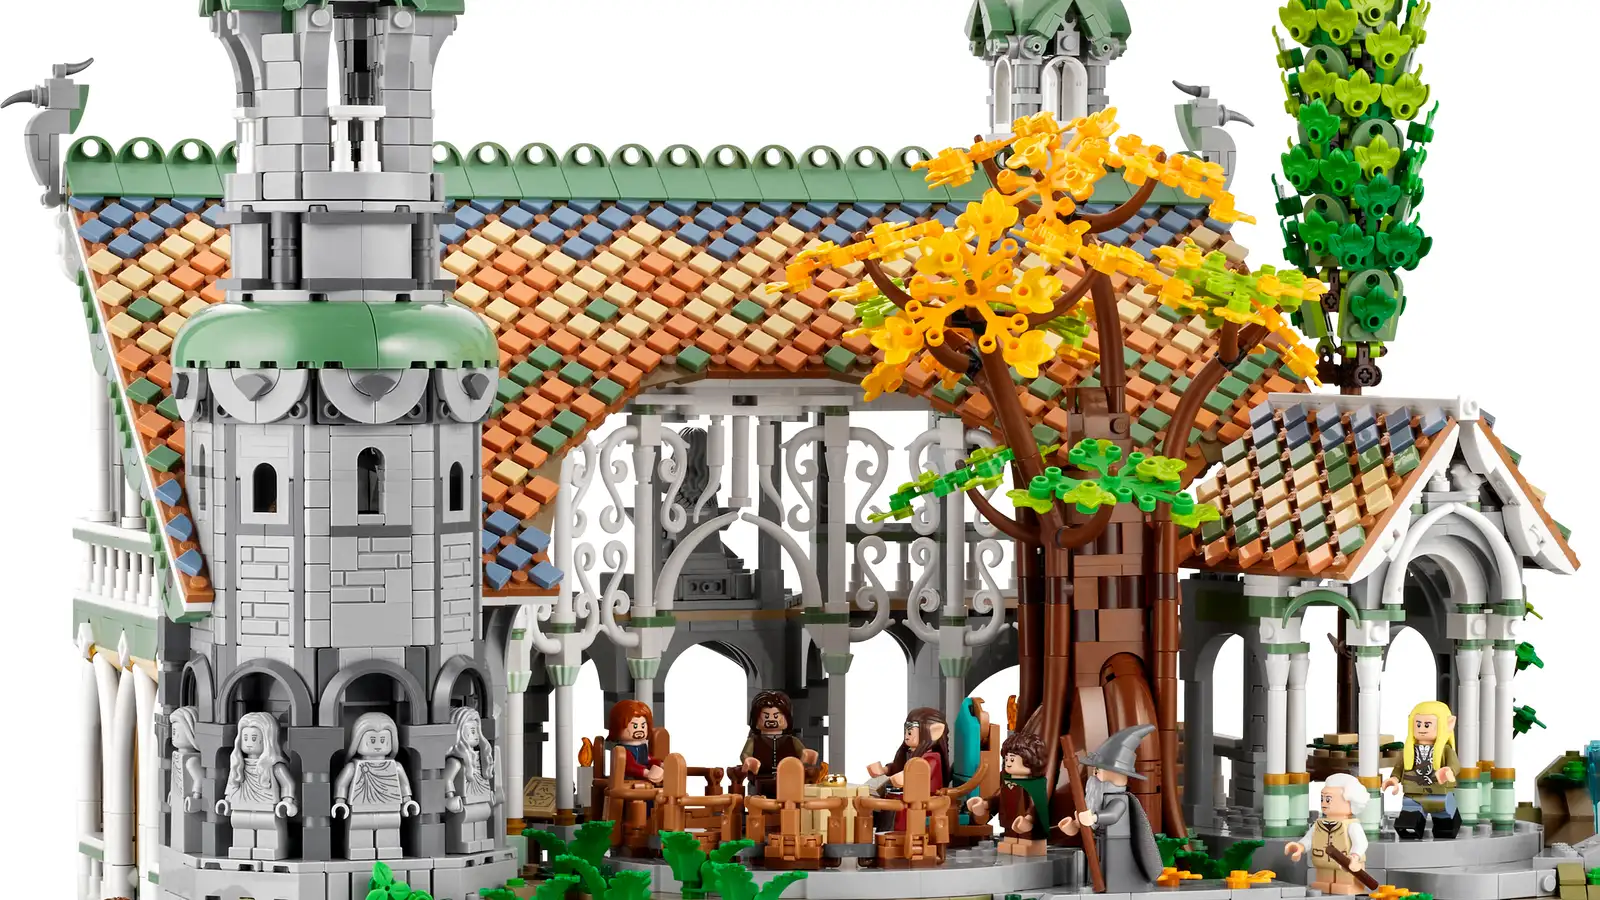 This 6,000 Piece Rivendell LEGO Set Takes You on a LORD OF THE RINGS  Adventure - Nerdist